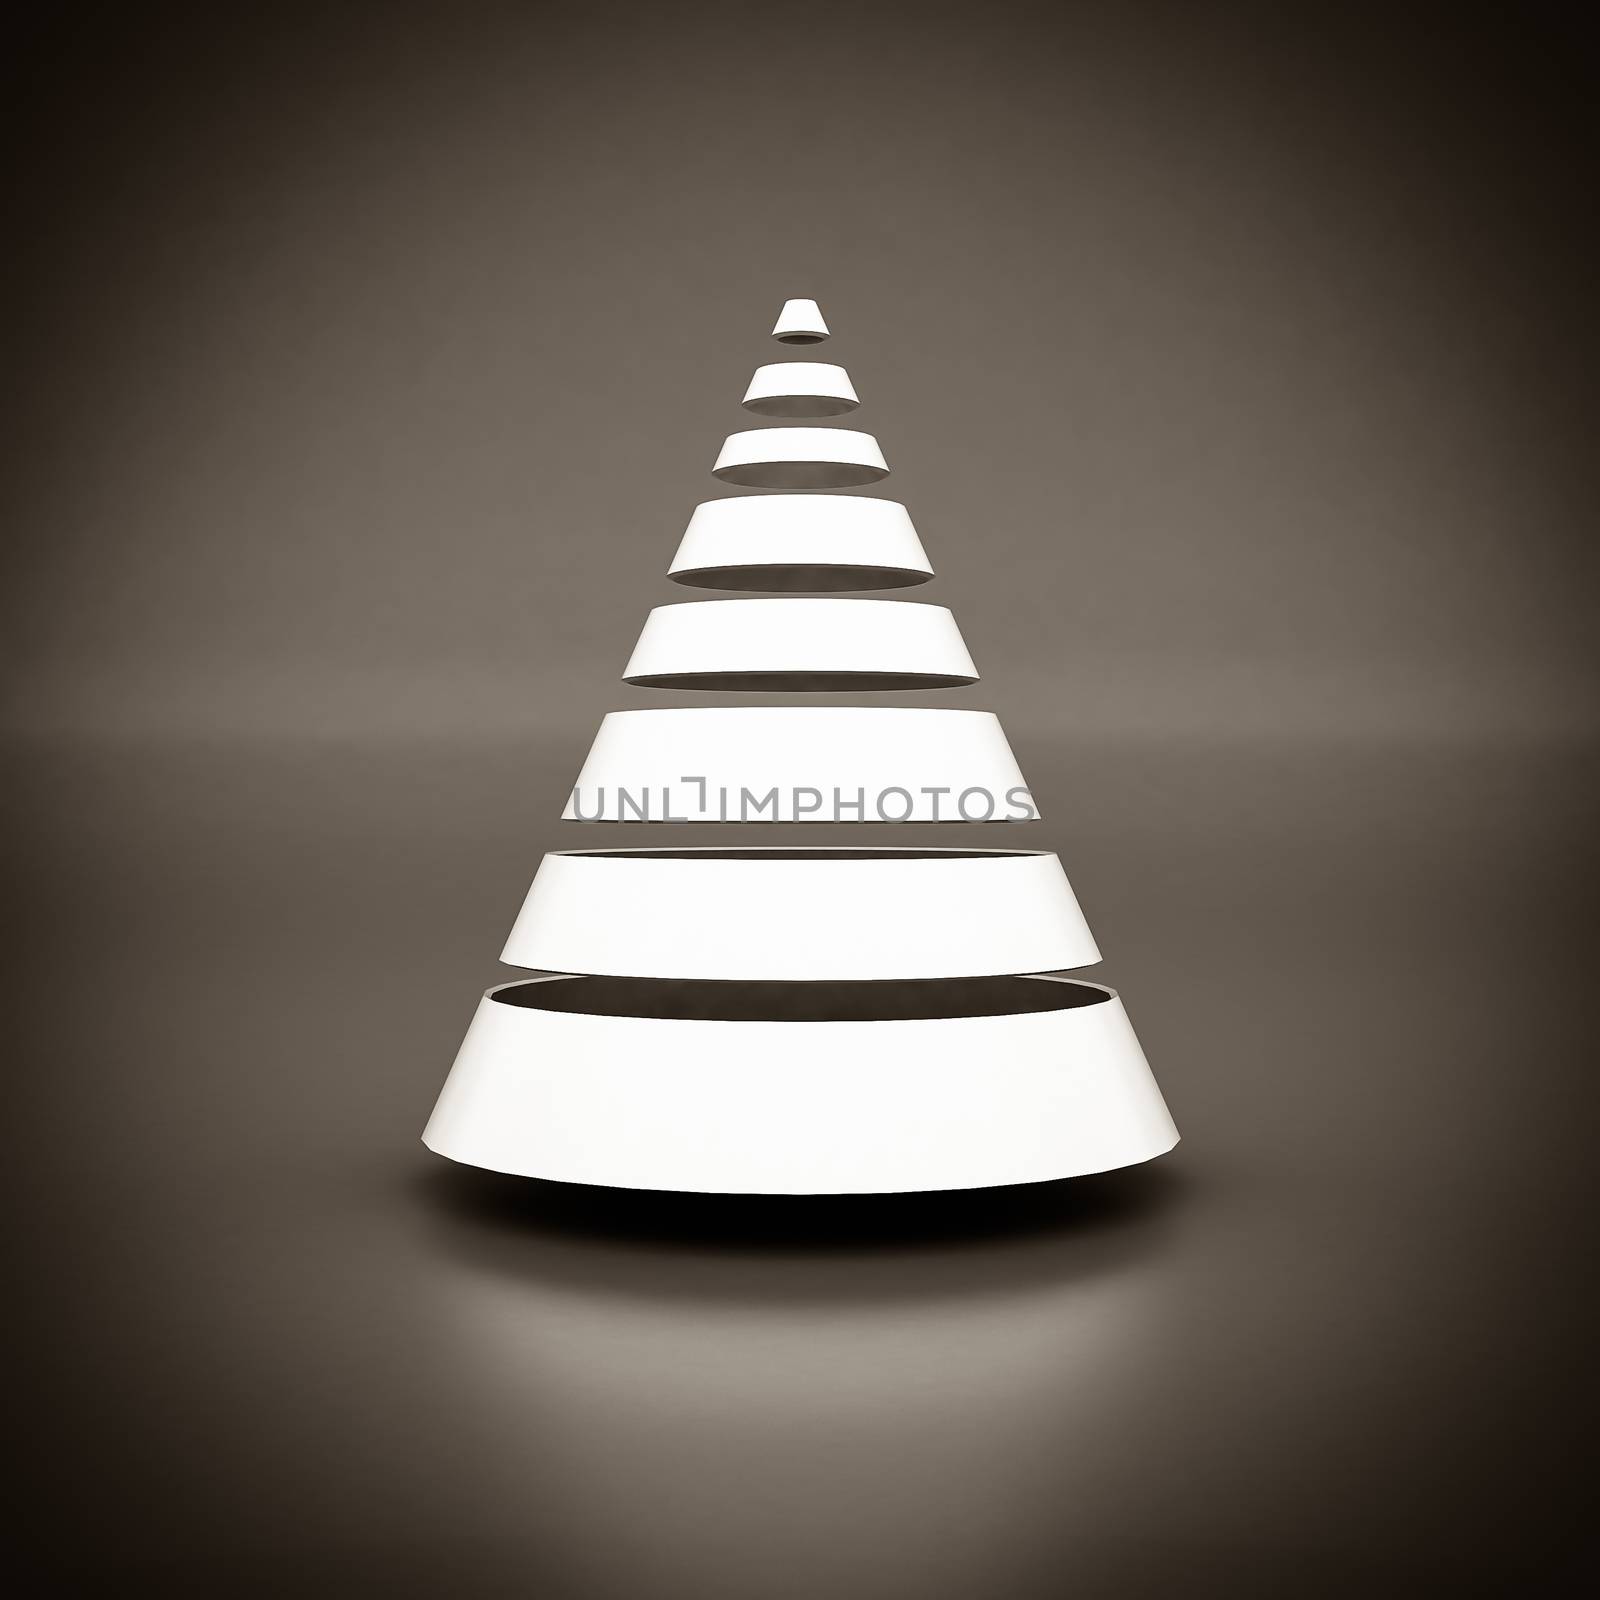 white geometric figure on a gray background. black and white